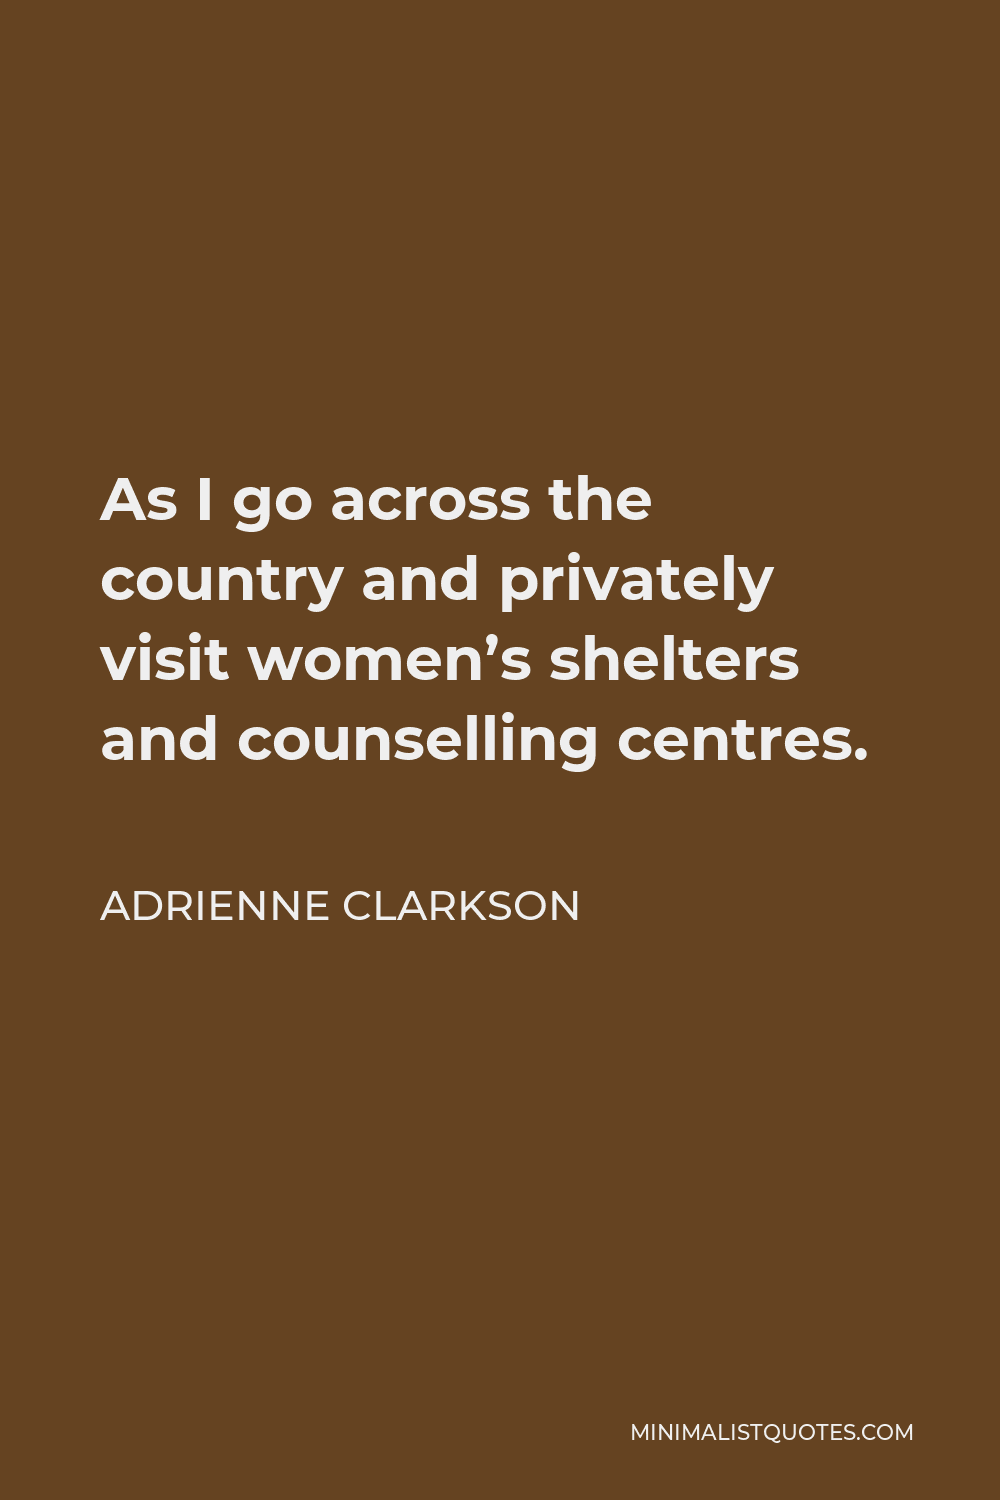 Adrienne Clarkson Quote - As I go across the country and privately visit women’s shelters and counselling centres.